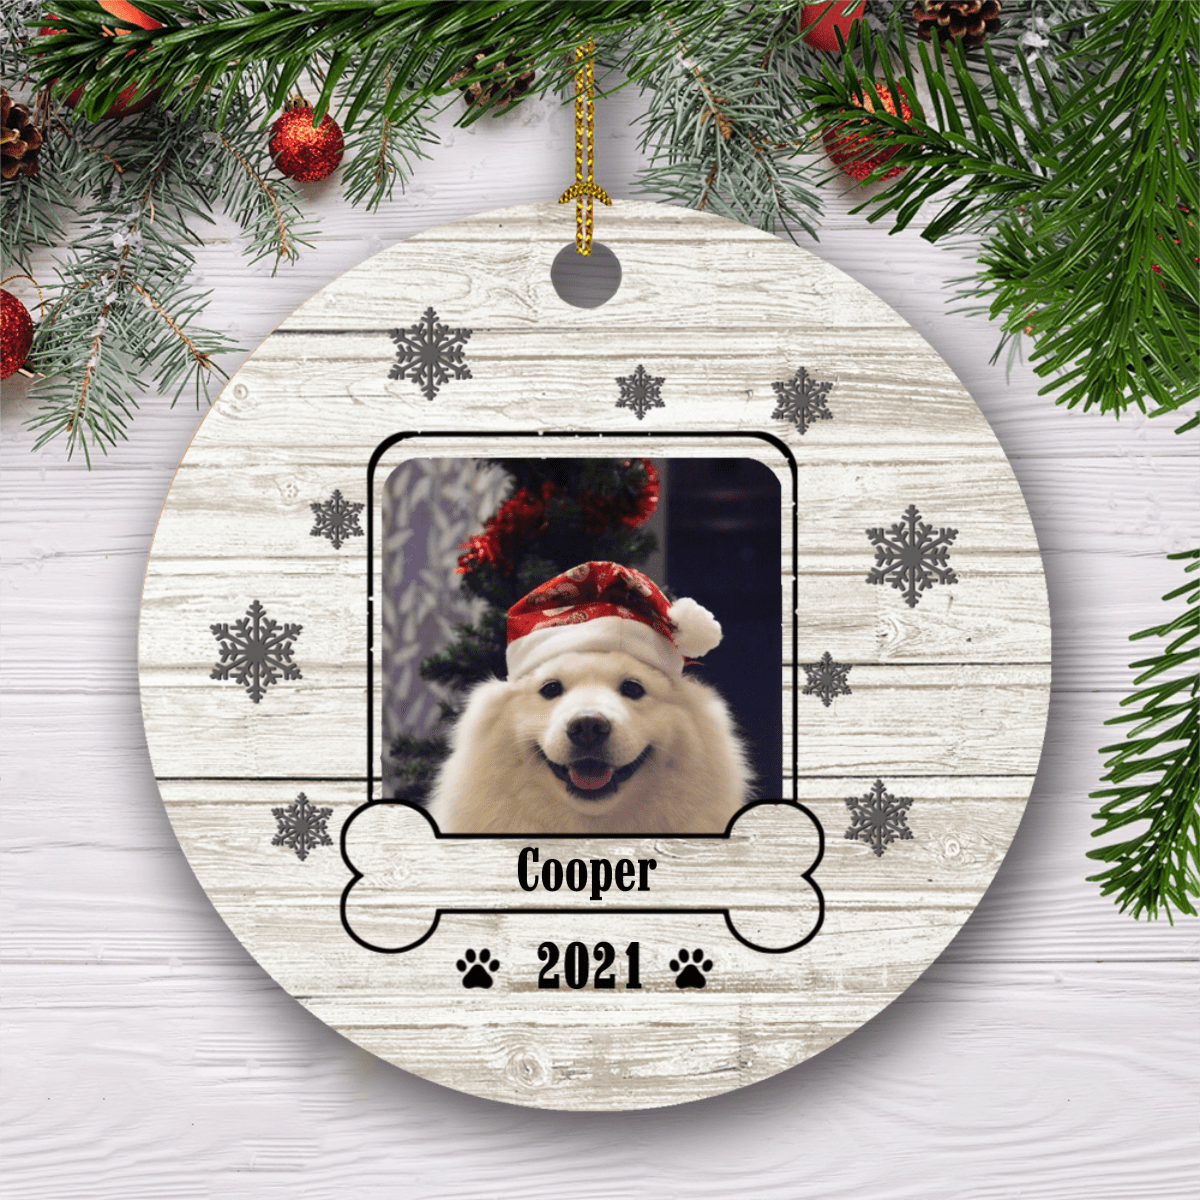 GeckoCustom Lovely Pet Photo , Custom Photo Ceramic Circle Ornament, Custom Dog Photo, Personalized Gift For Dog LoversSG02 Pack 1 / 2.75" tall - 0.125" thick